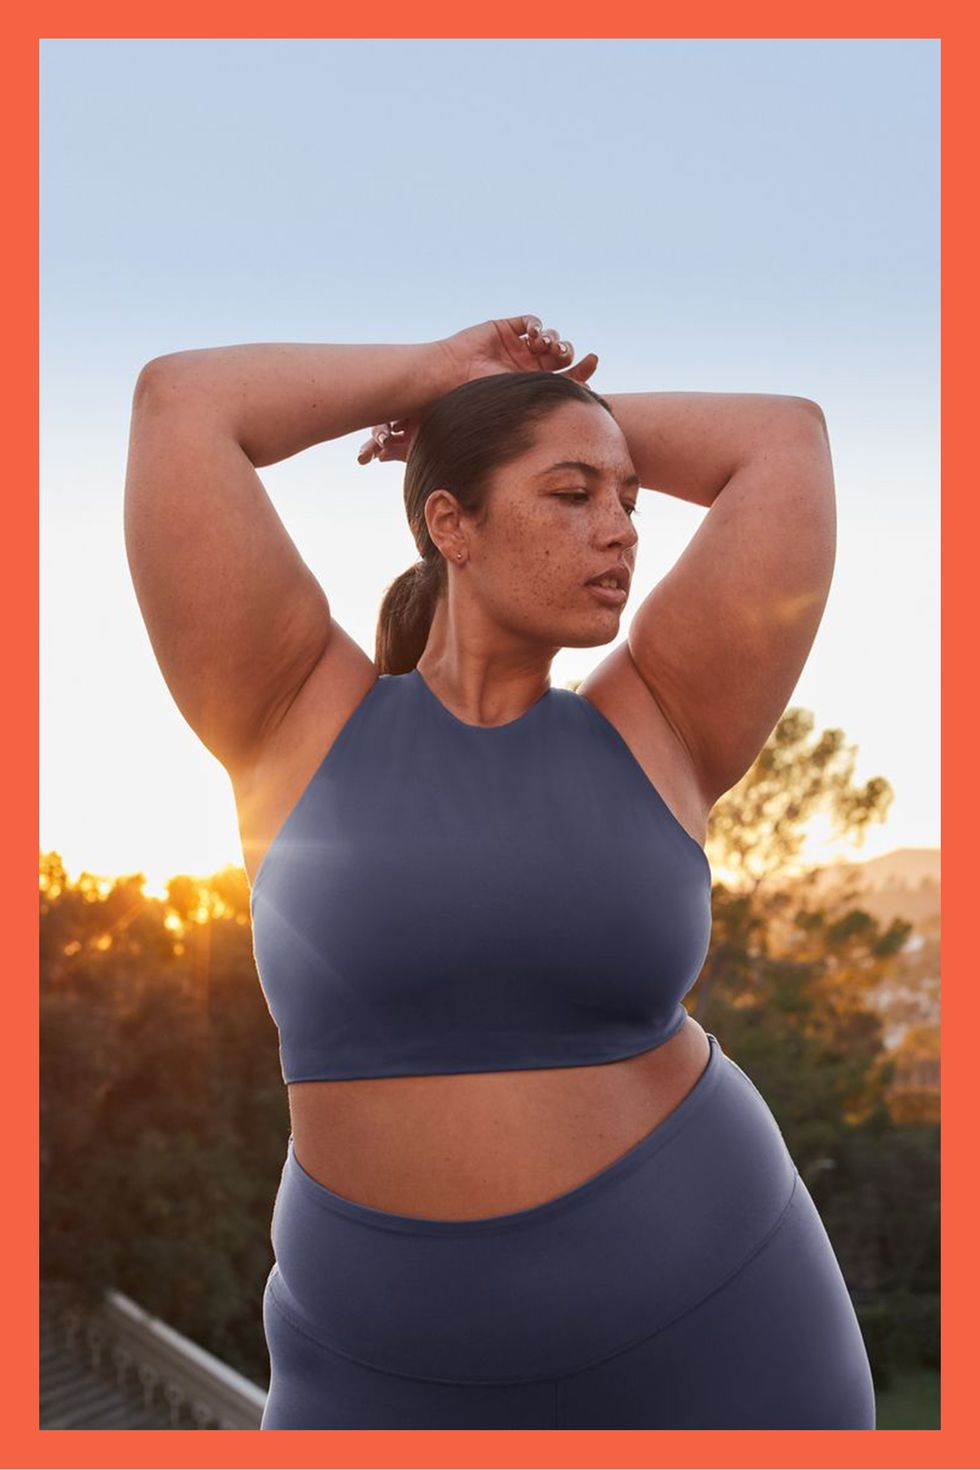 A Bra Fit For You: Athleta Exhale Bra D-DD+, These Are the 12 Best Sports  Bras, According to Our Instagram Followers